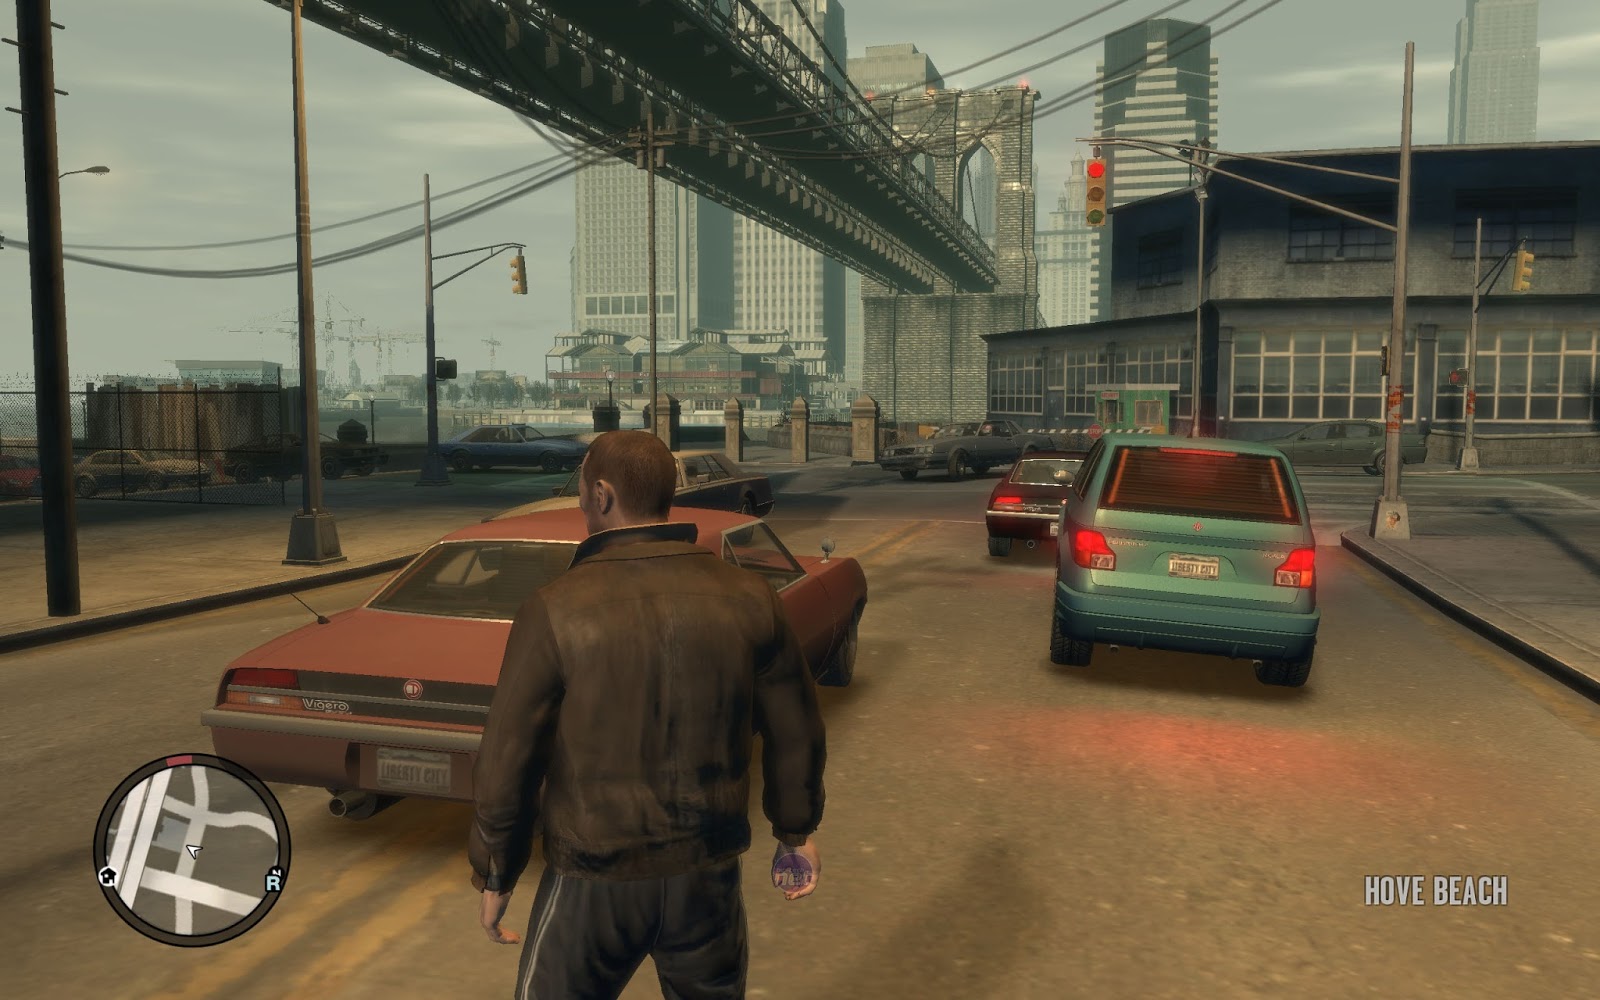 GTA 4 Pc Game Super Highly Compressed 2 mb 100% Working ...